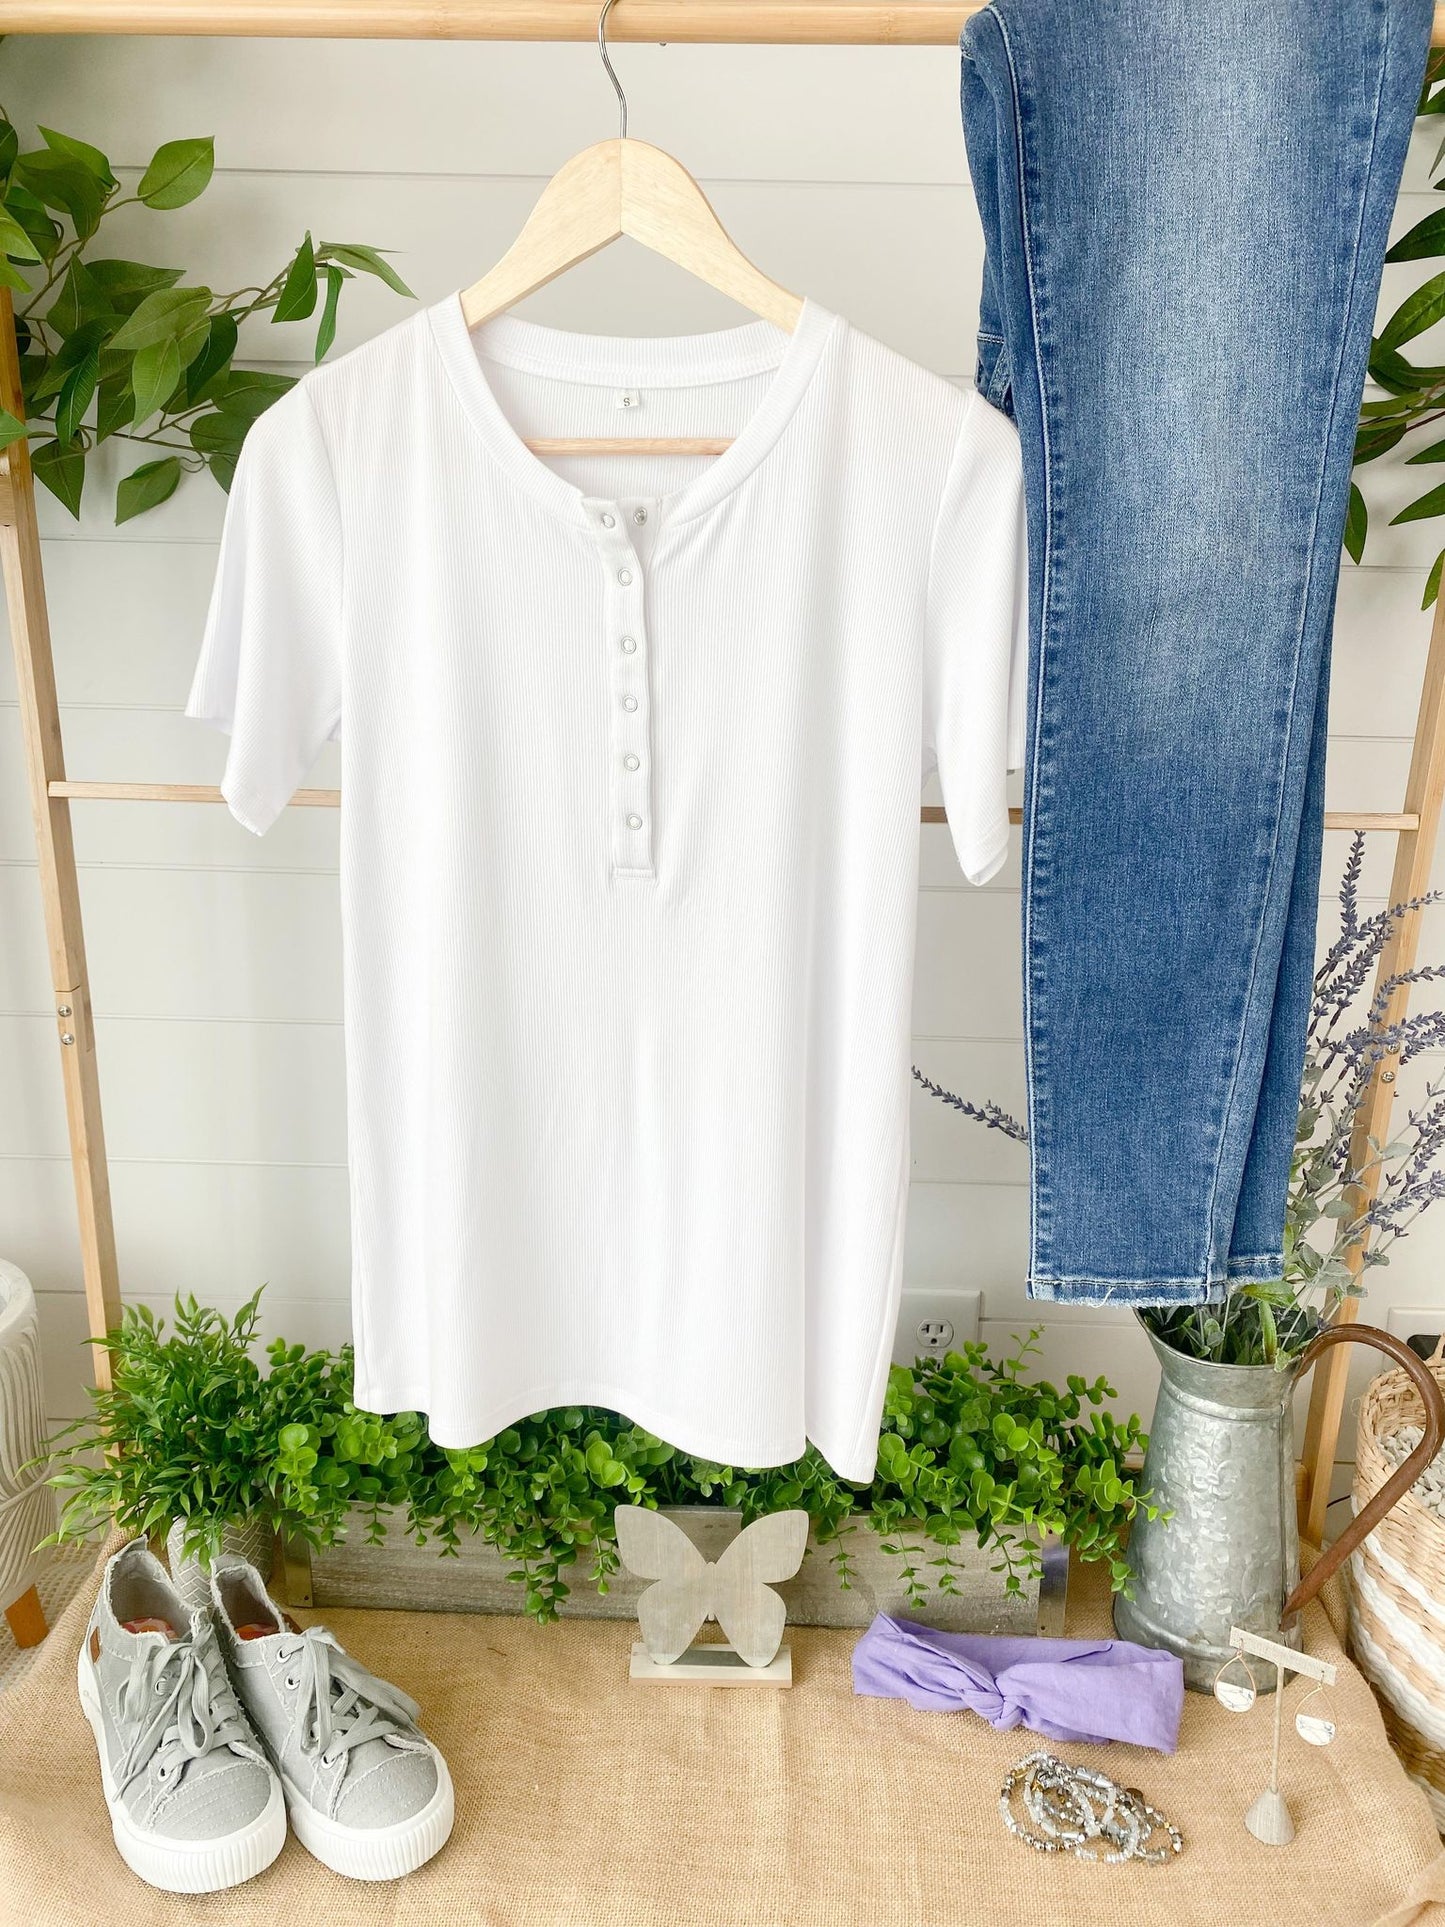 IN STOCK Brinley Button Top - White FINAL SALE